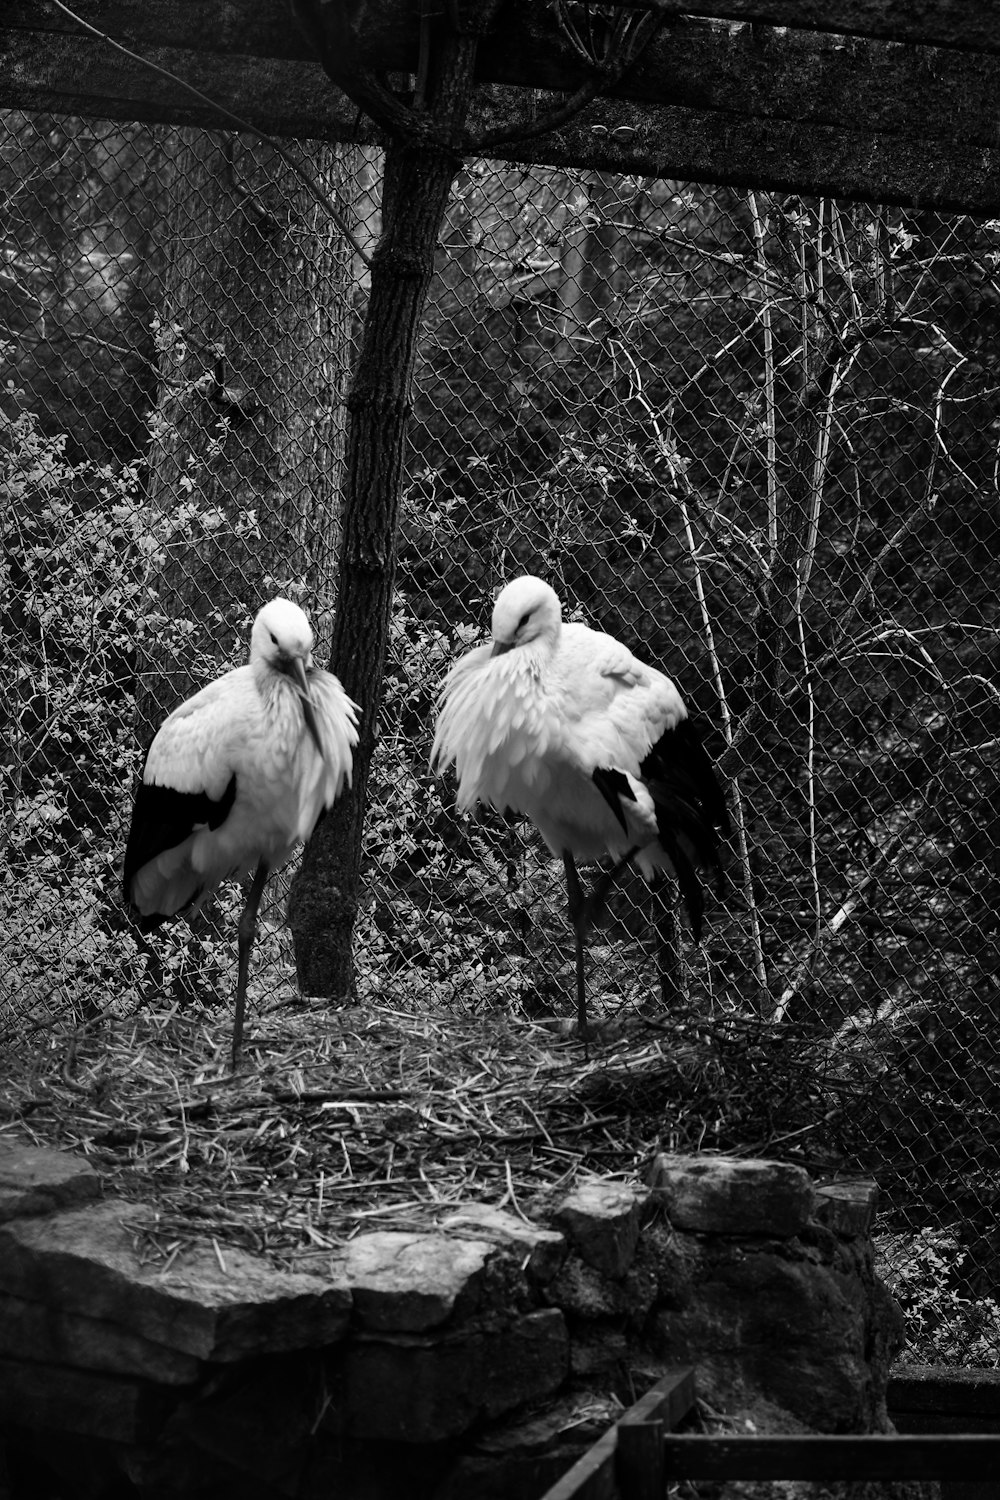 two large birds standing next to each other in a forest